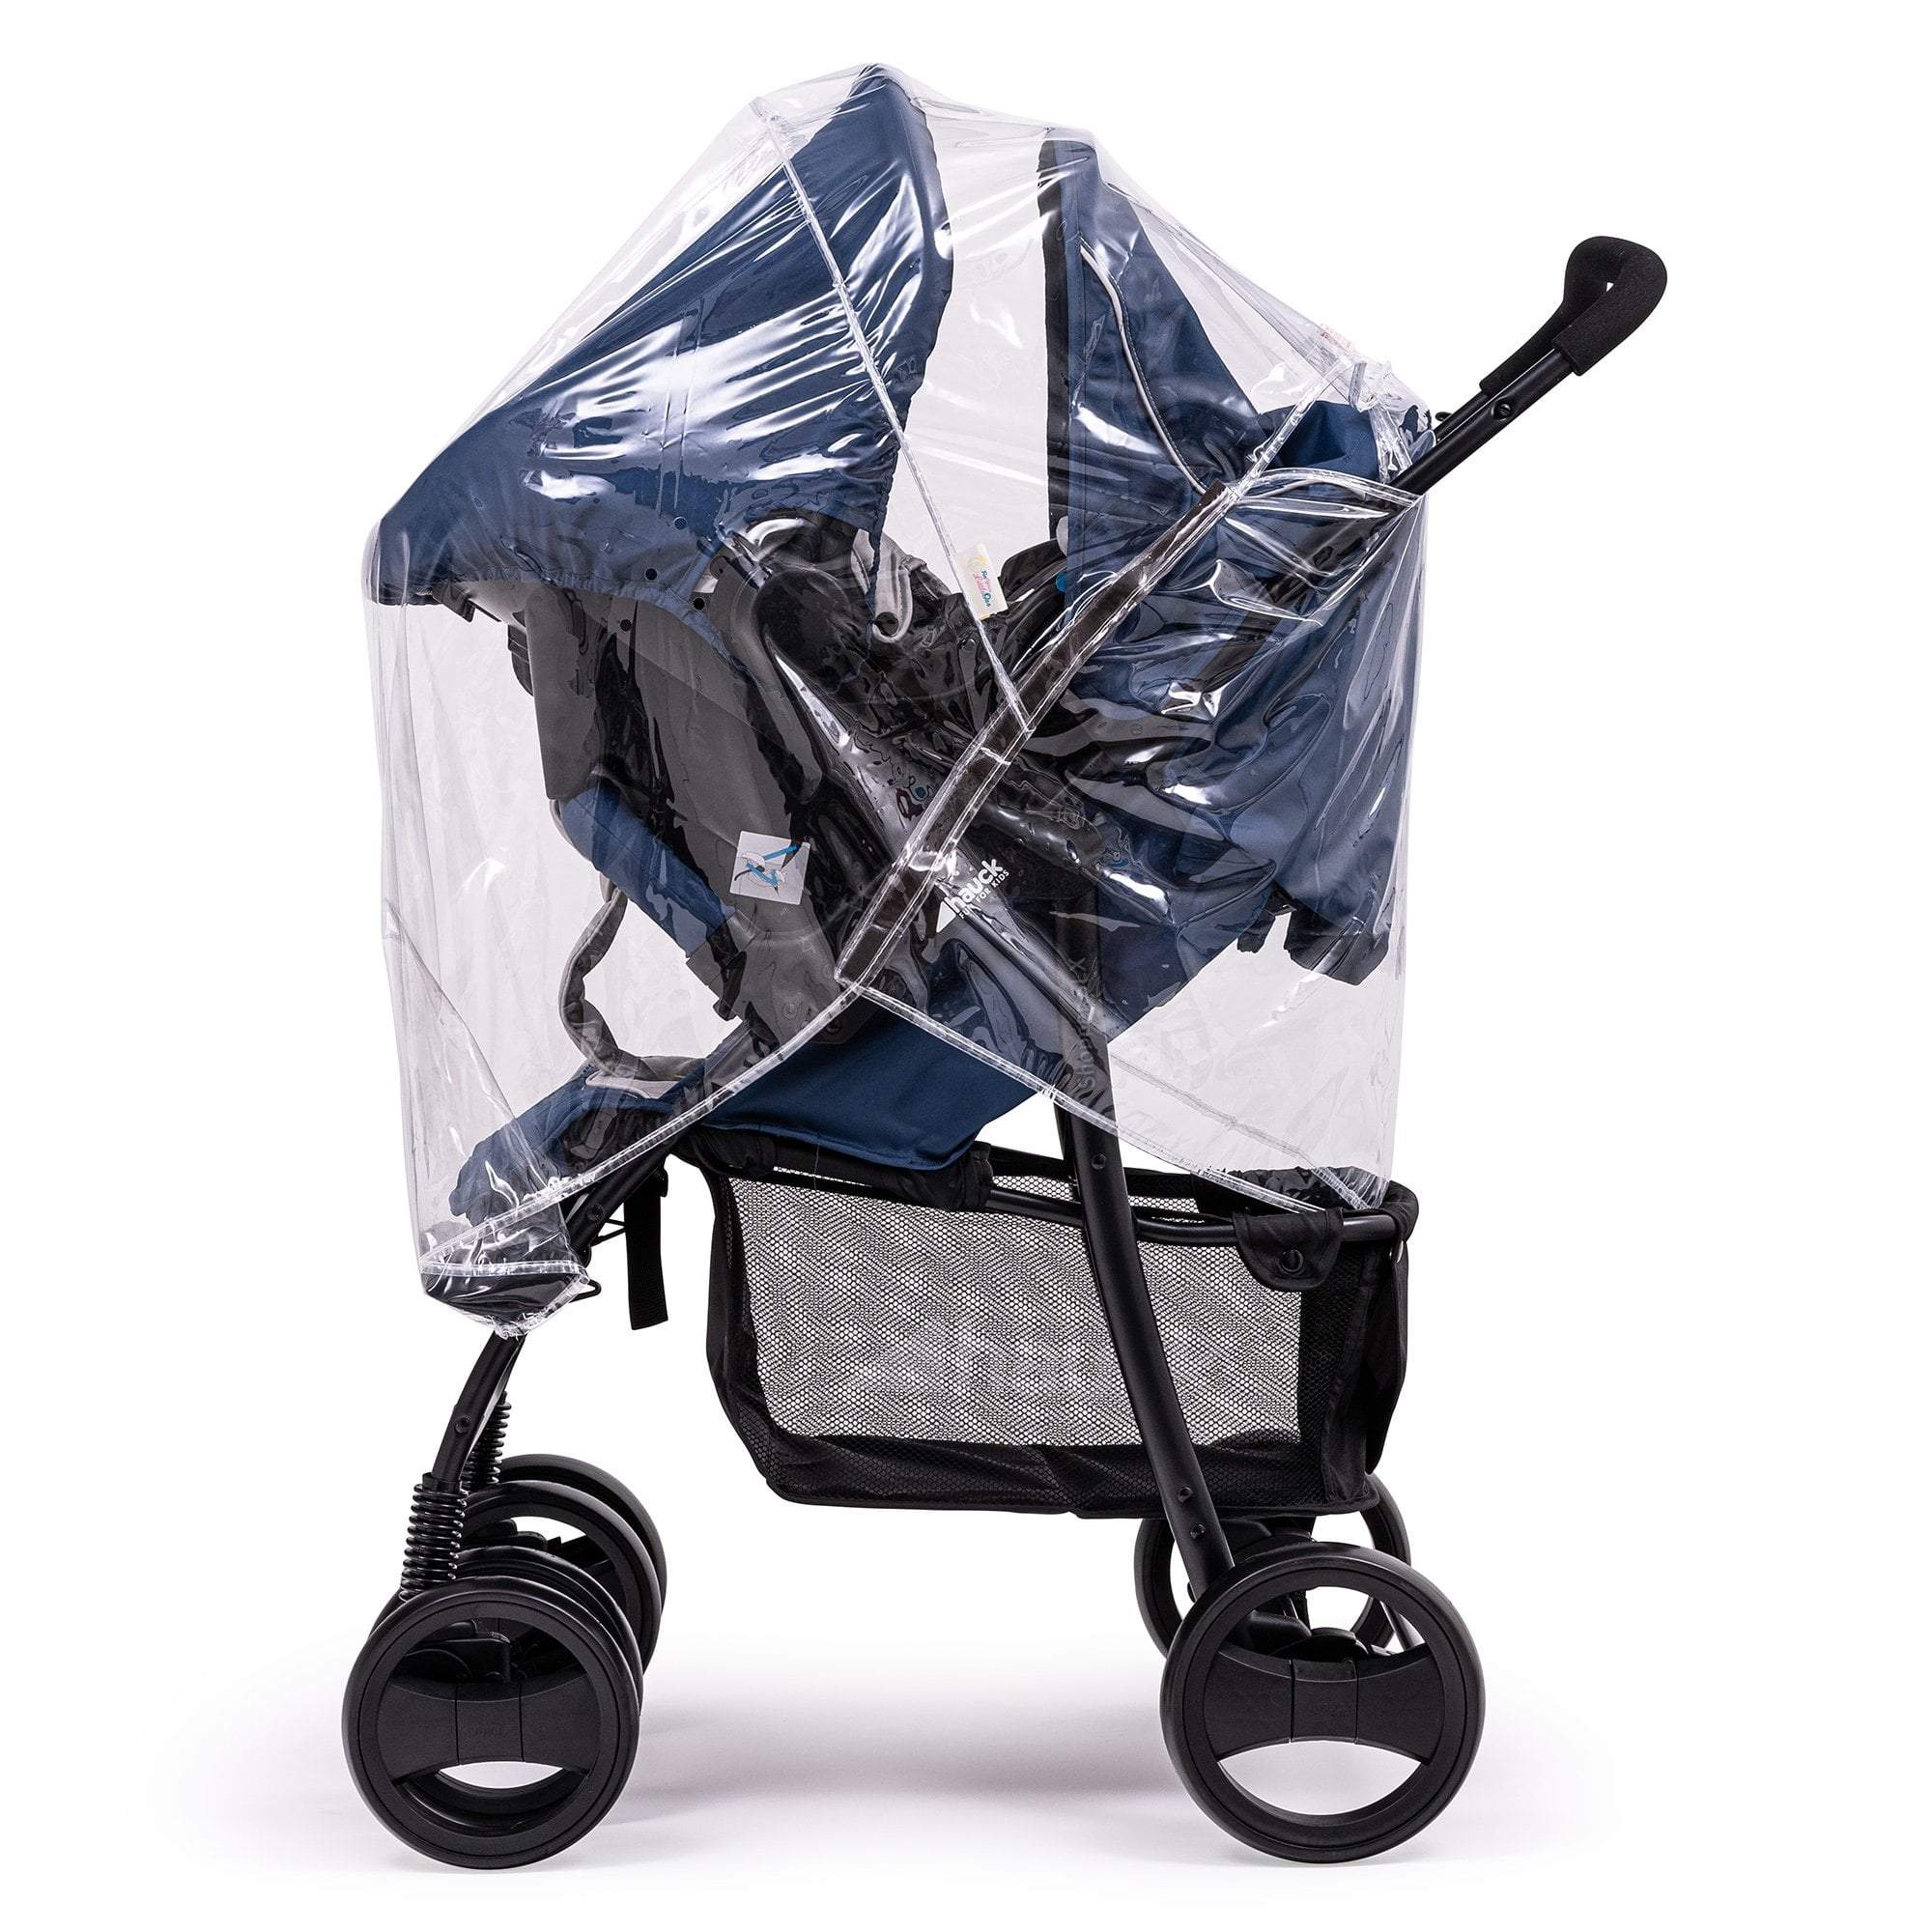 Travel System Raincover Compatible with GB - Fits All Models - For Your Little One